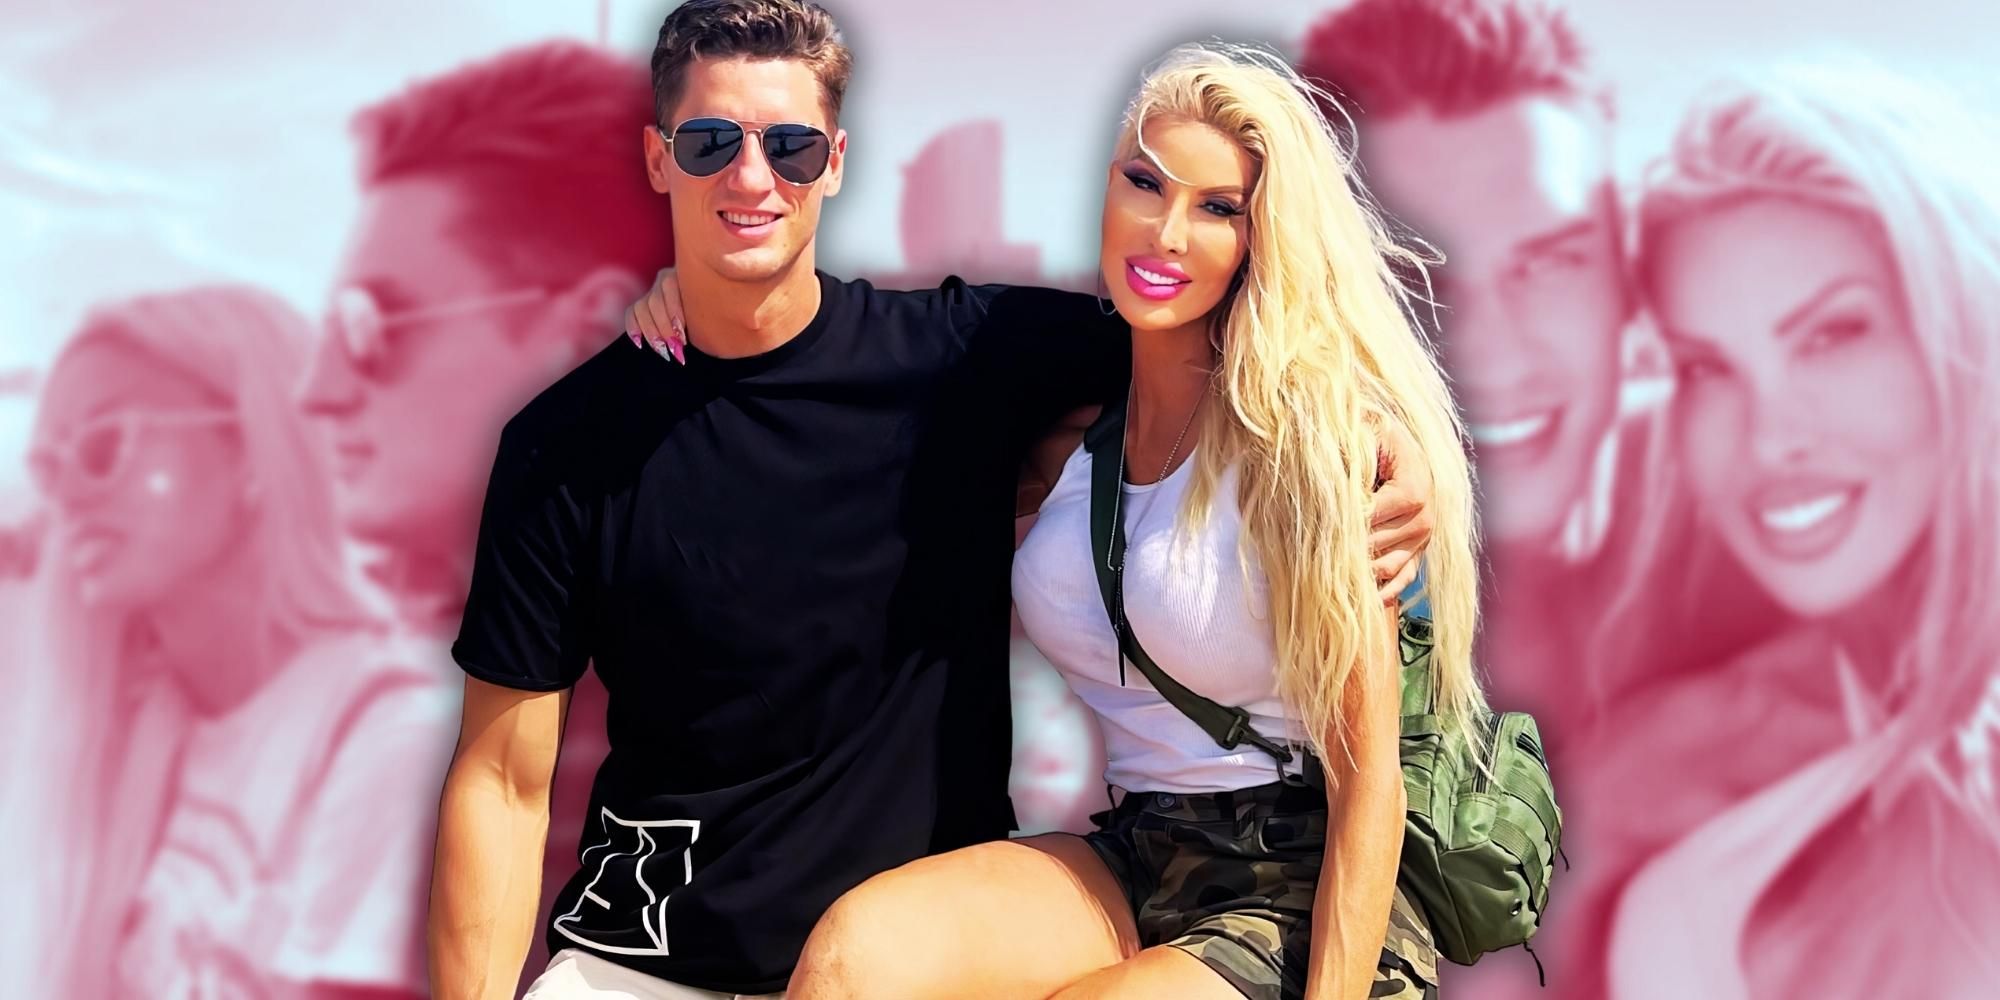 90 Day Fiancé Season 10's Nikki and Justin on a trip smiling during vacation with pink background